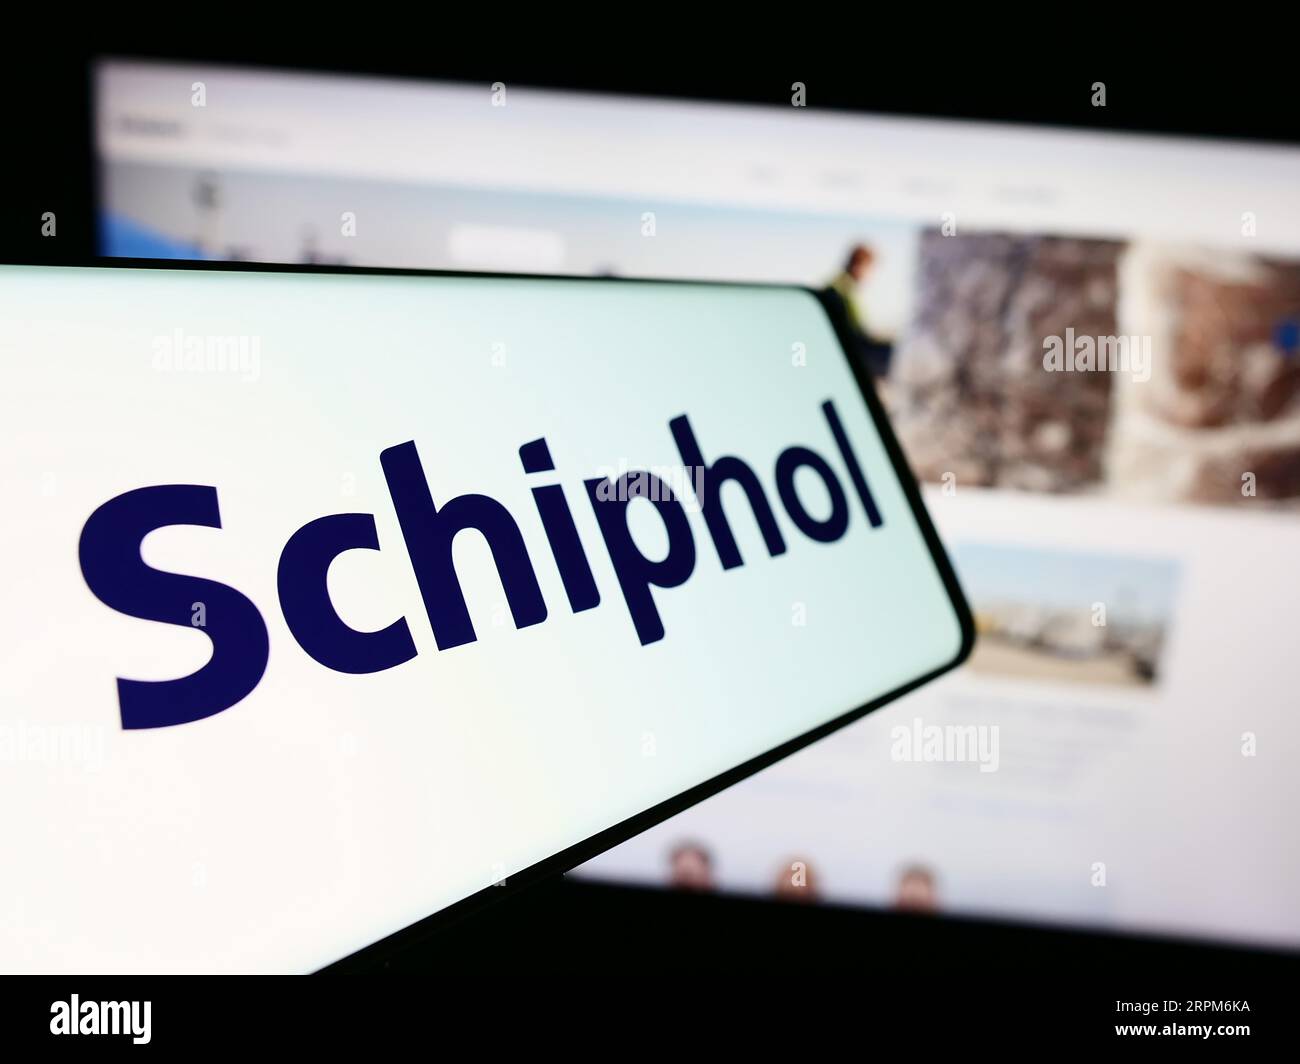 Mobile phone with logo of Dutch airport company Royal Schiphol Group N.V. on screen in front of website. Focus on center-left of phone display. Stock Photo